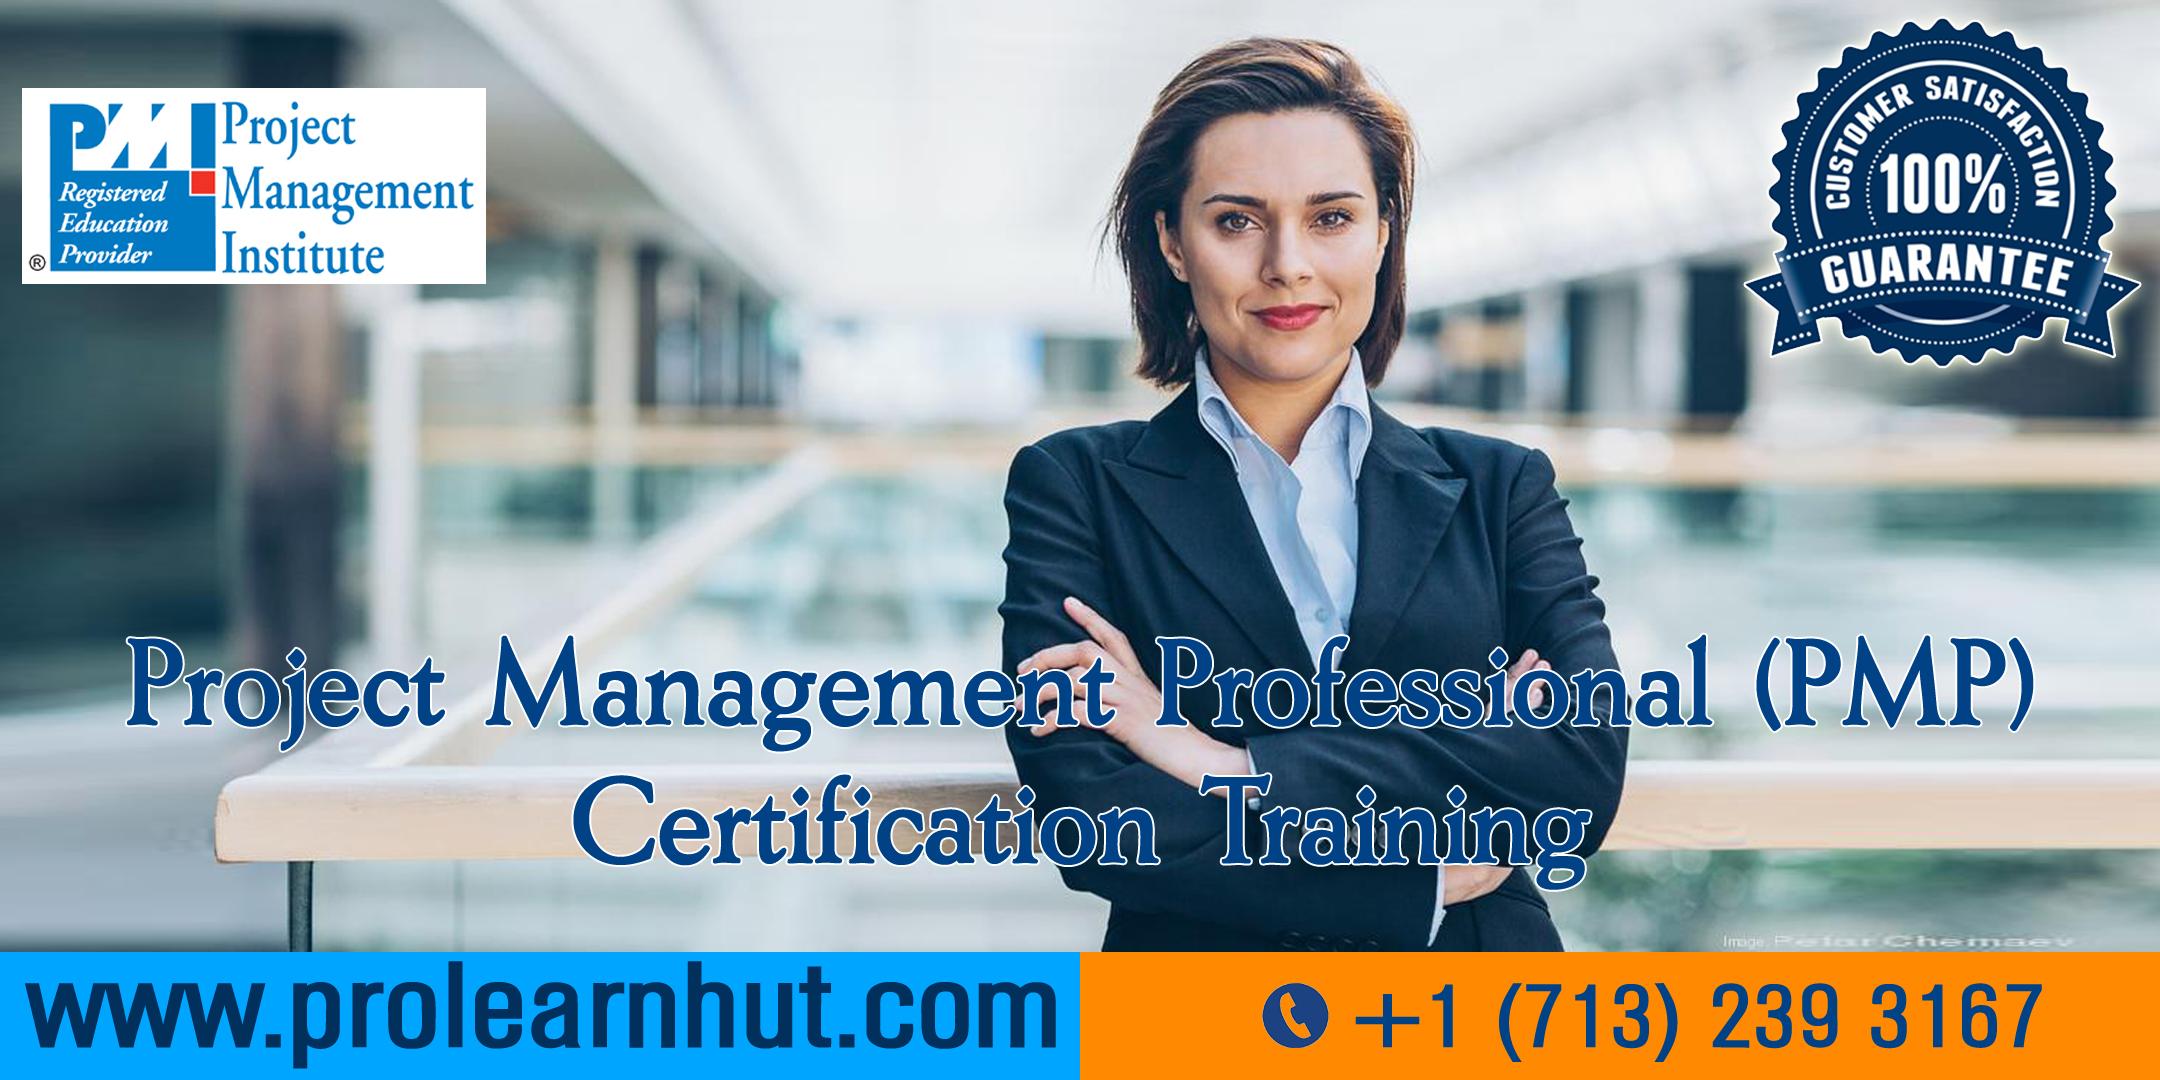 PMP Certification | Project Management Certification| PMP Training in Fargo, ND | ProLearnHut